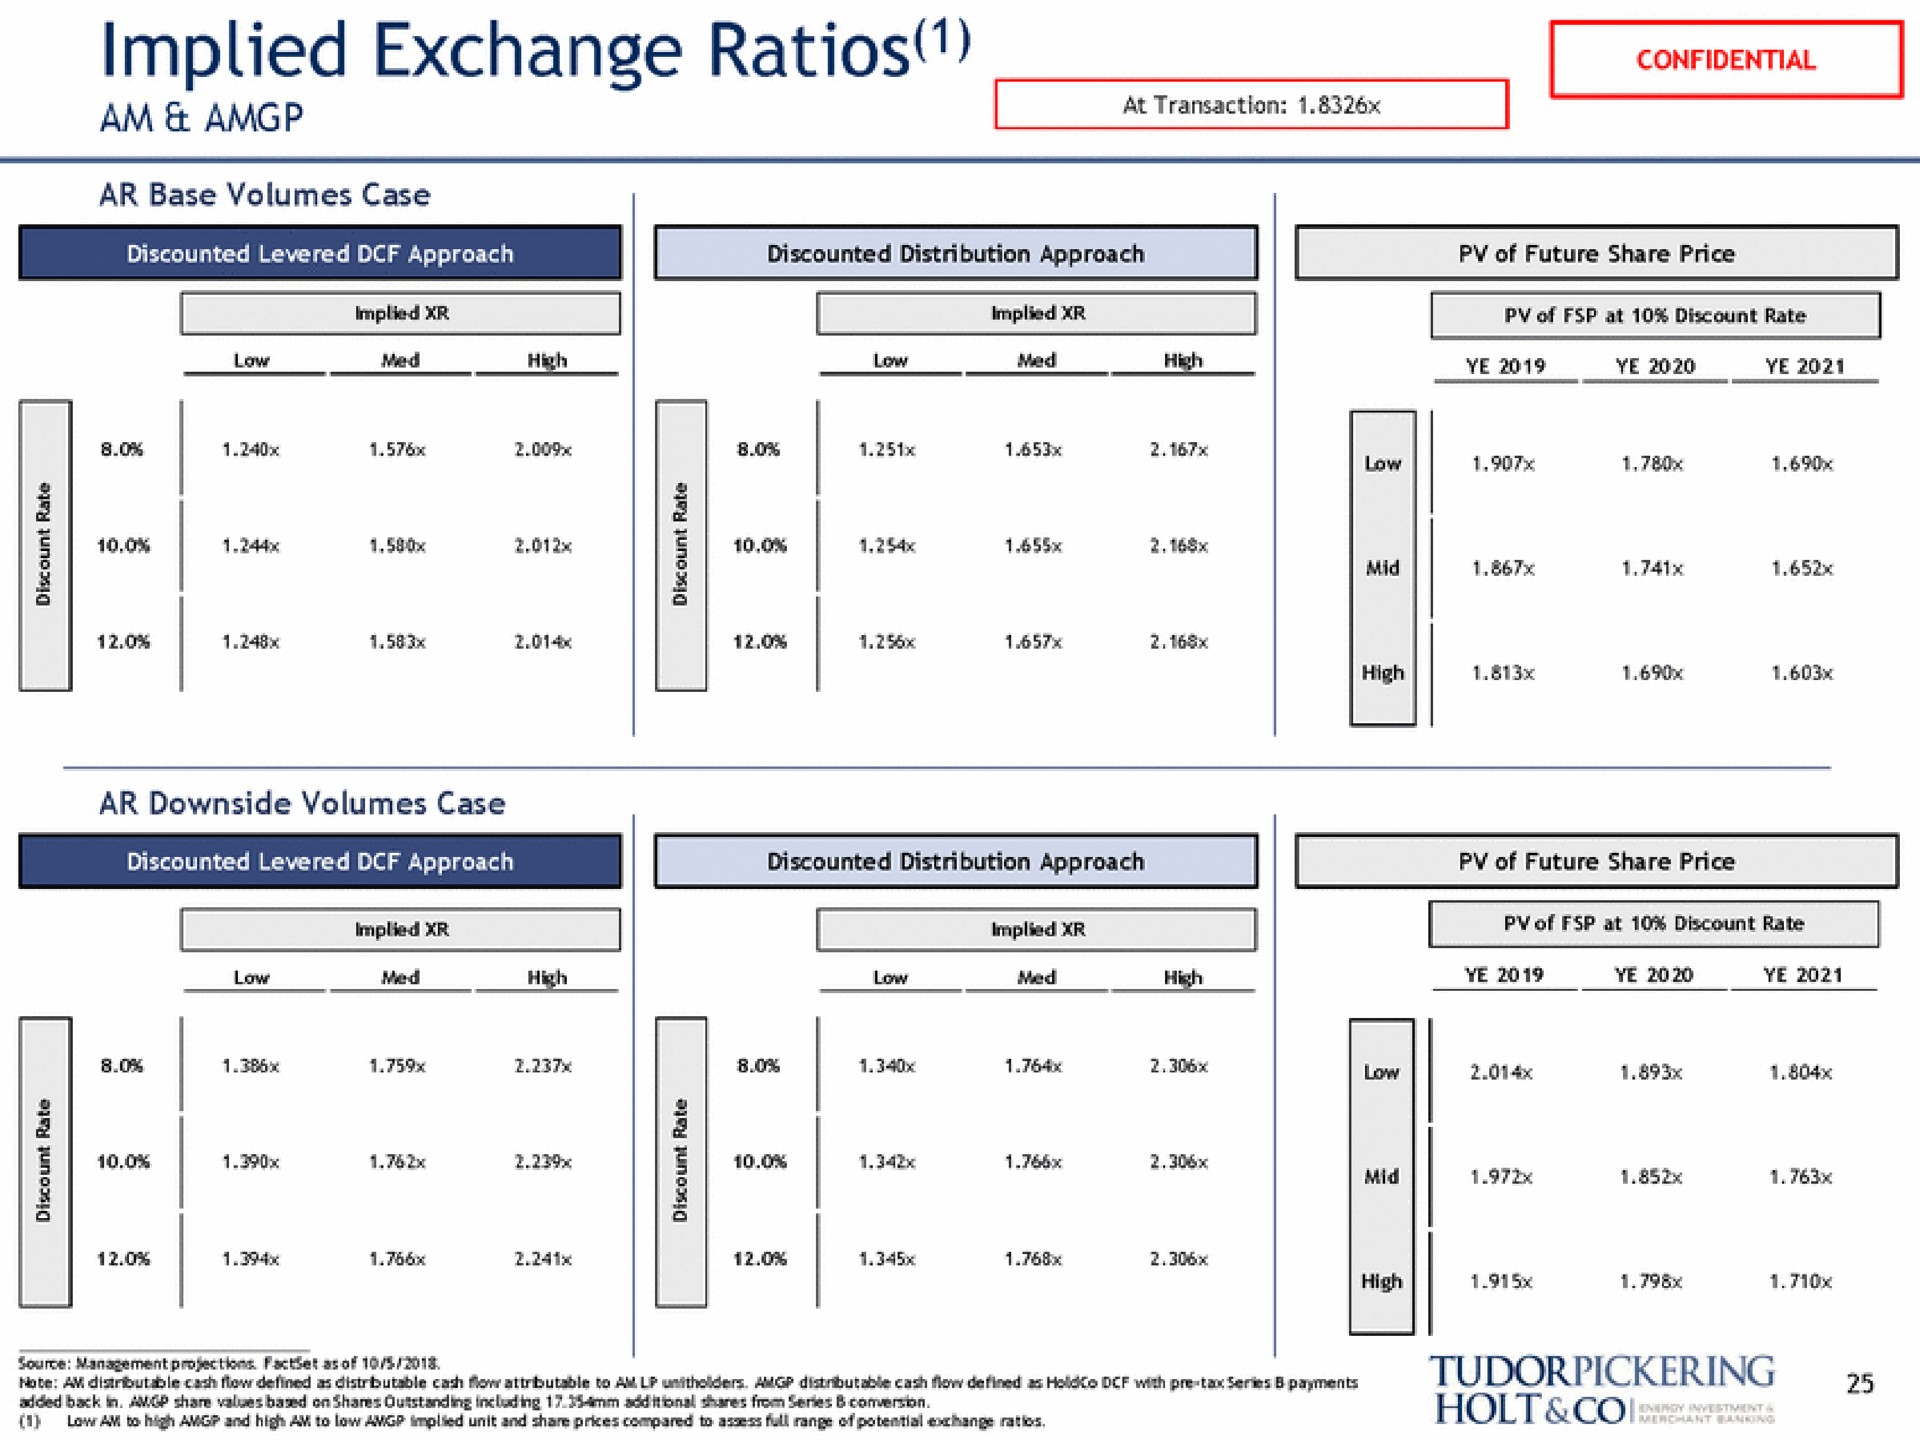 implied exchange ratios am source management projections at of | Tudor, Pickering, Holt & Co